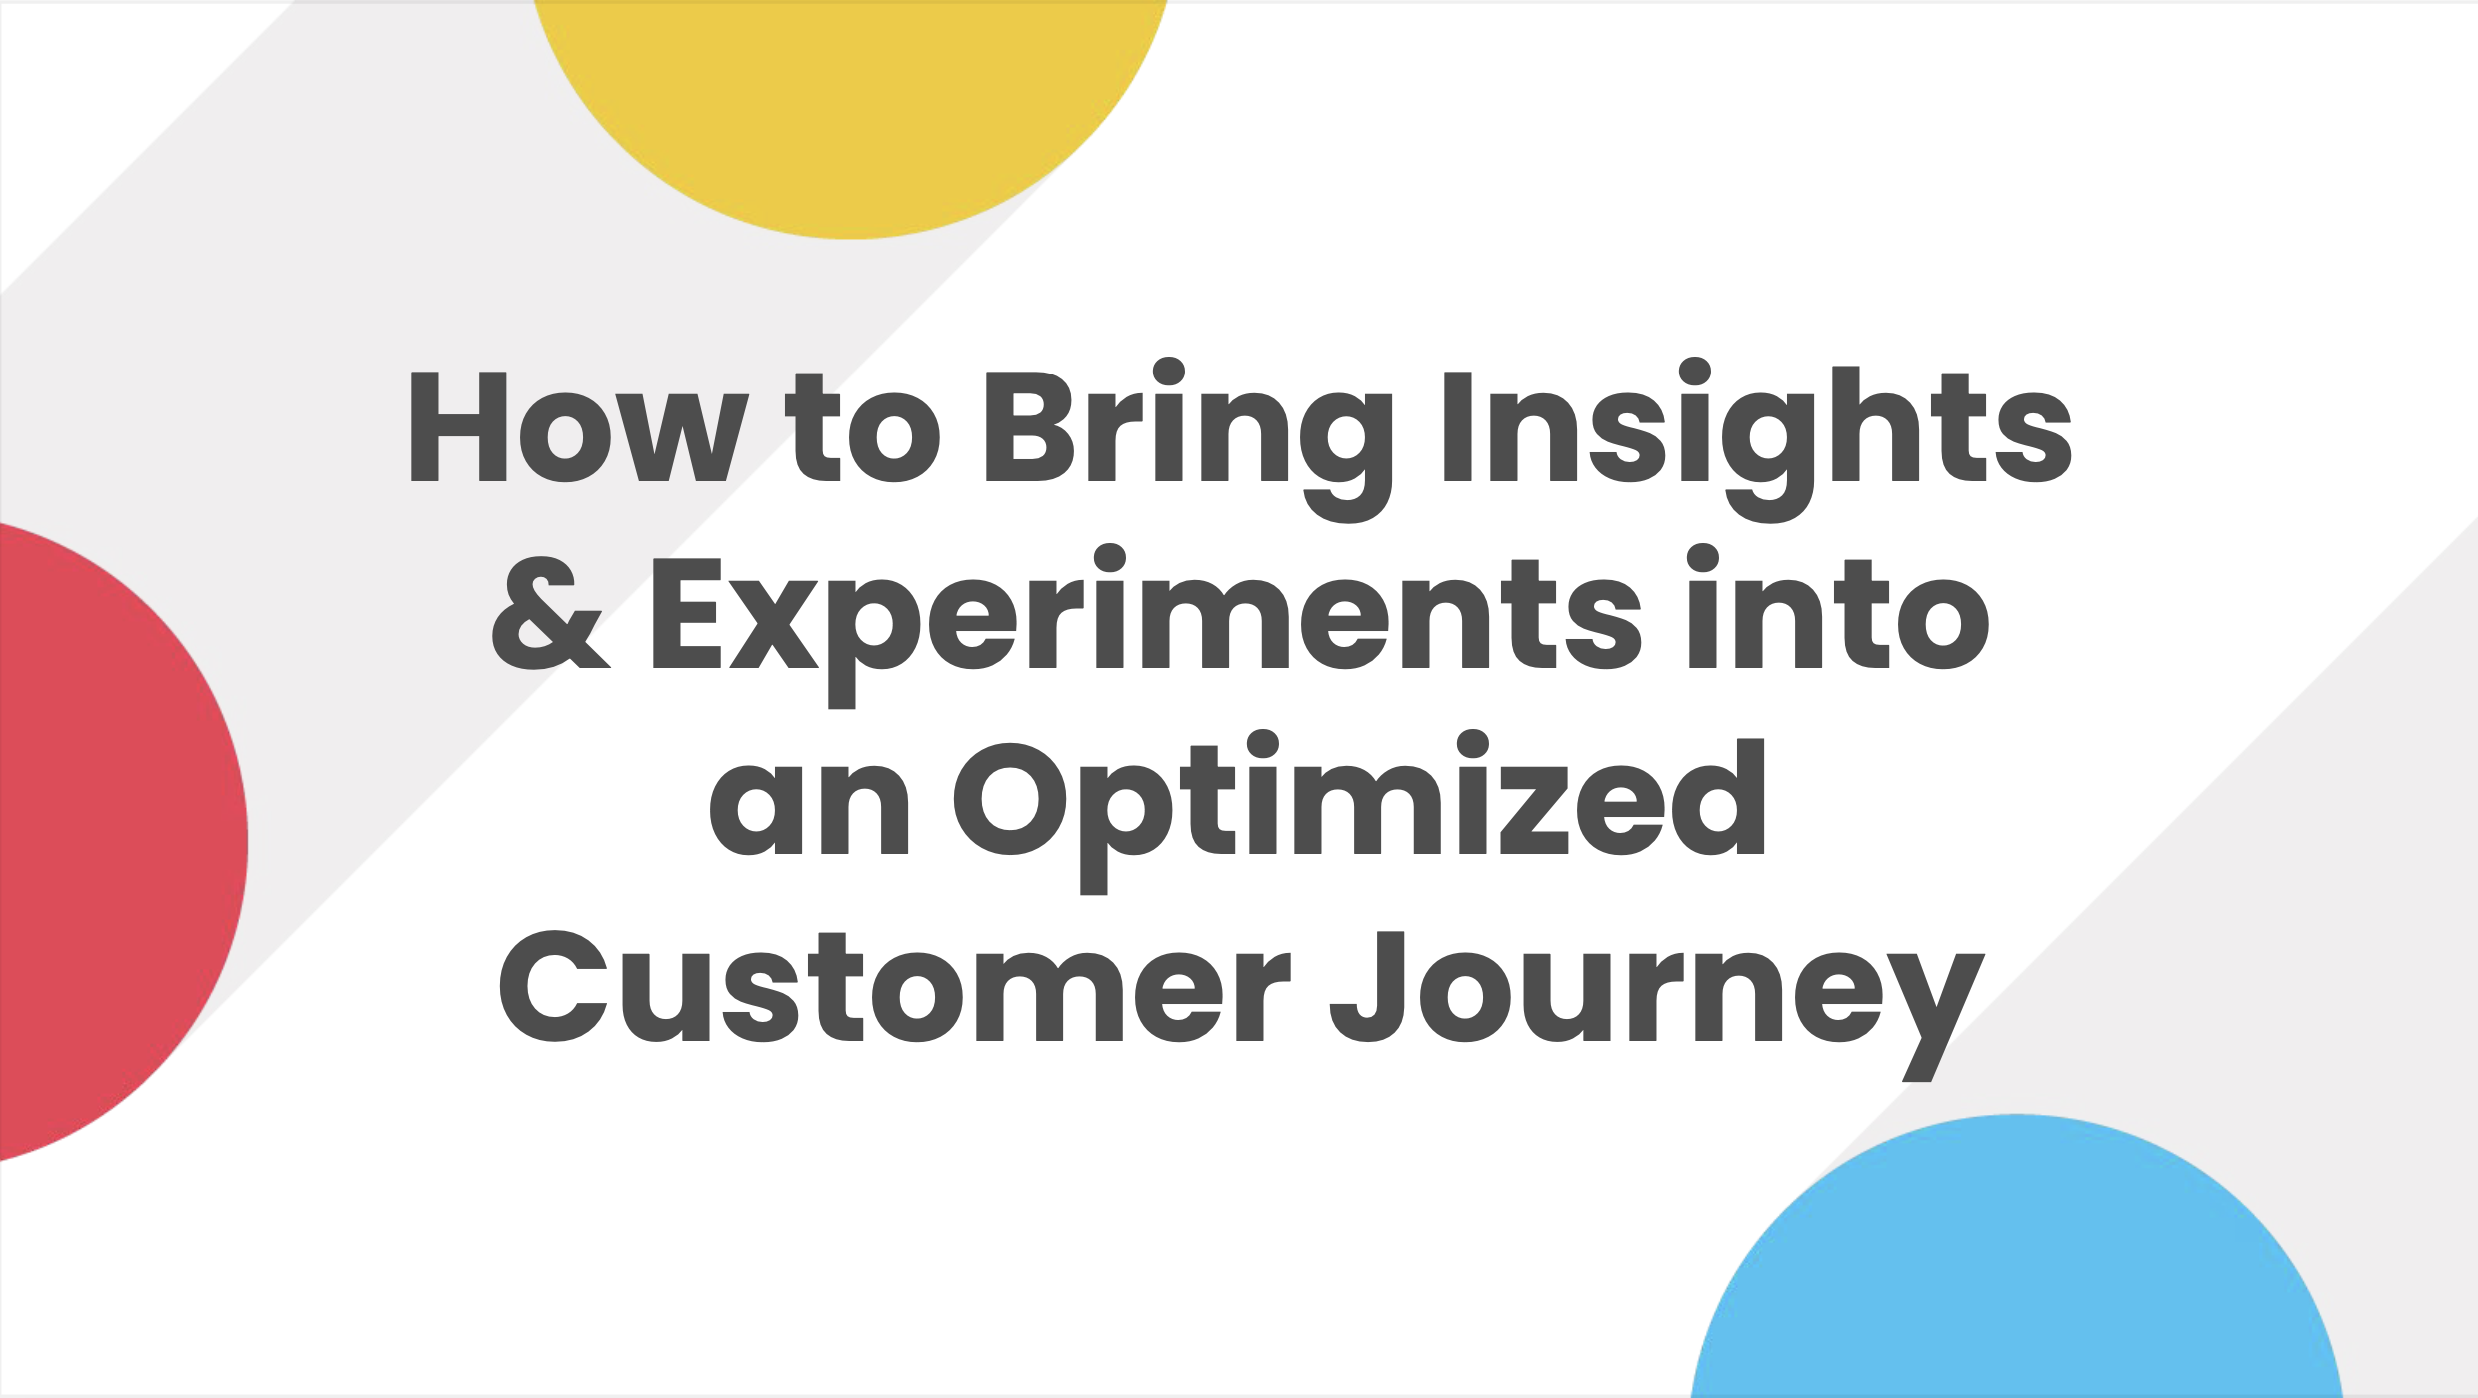 How to Bring Insights & Experiments into an Optimized Customer Journey